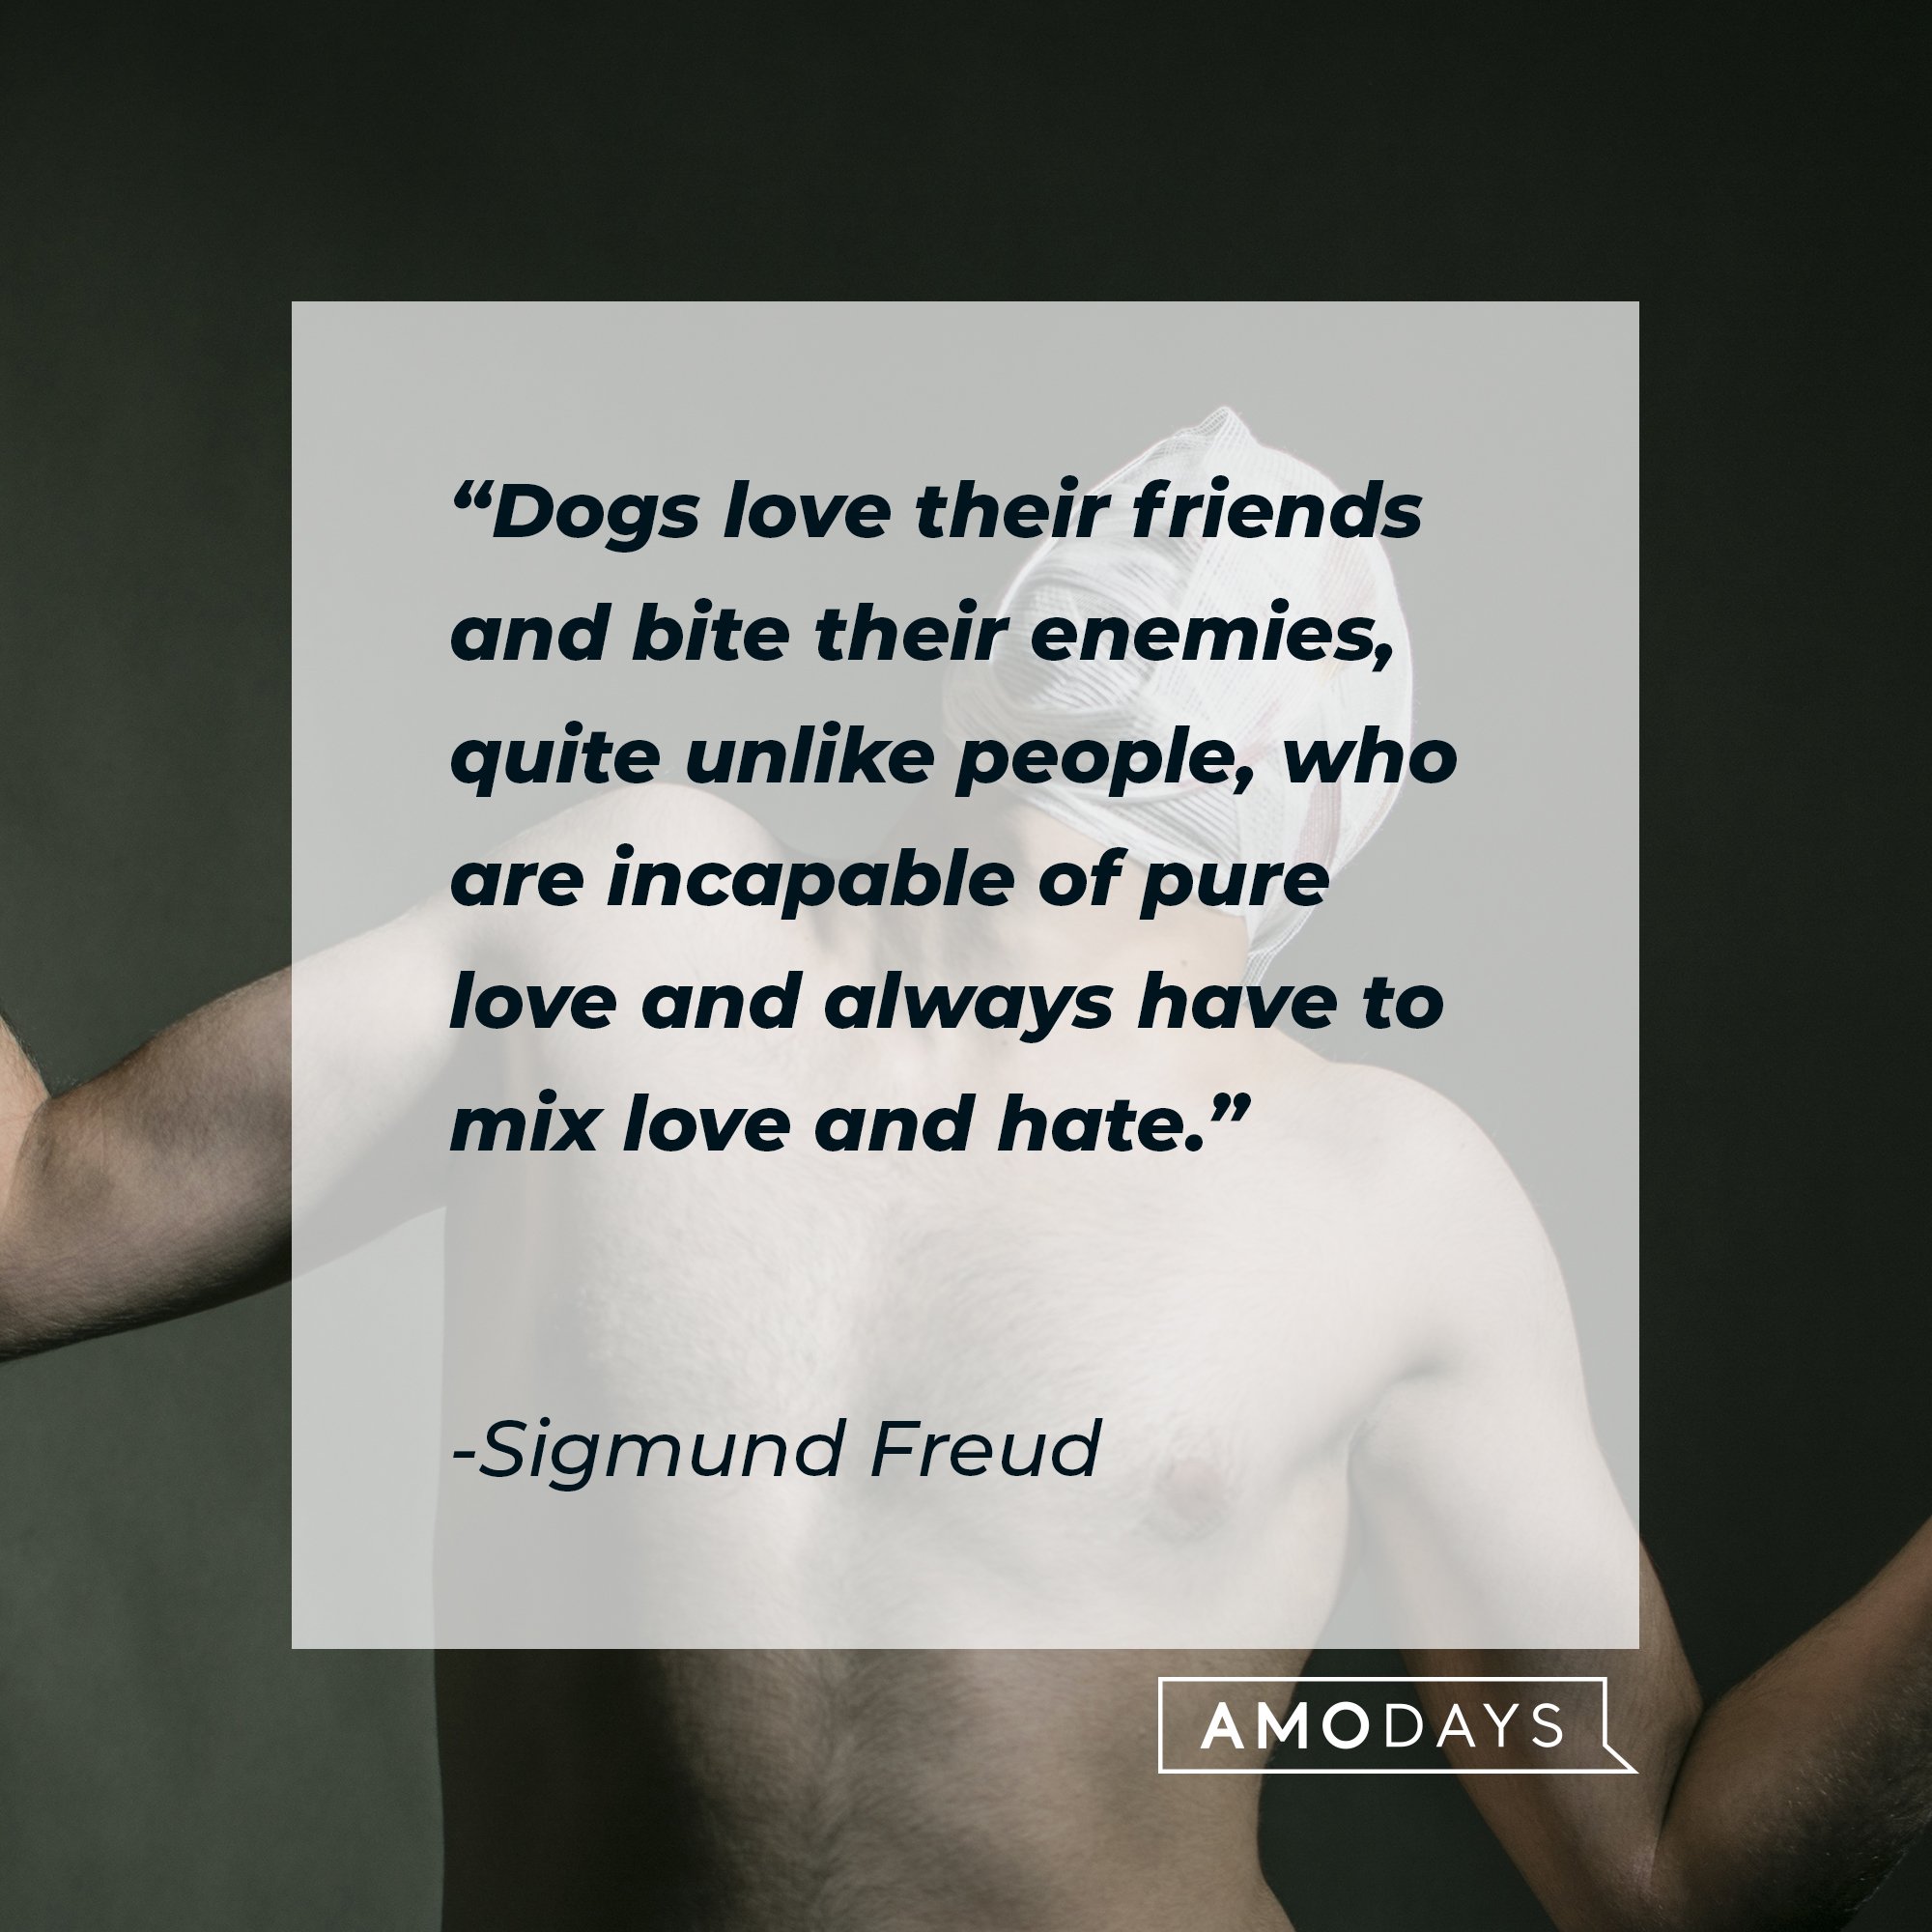 Sigmund Freud’s quote: "Dogs love their friends and bite their enemies, quite unlike people, who are incapable of pure love and always have to mix love and hate." | Image: AmoDays 